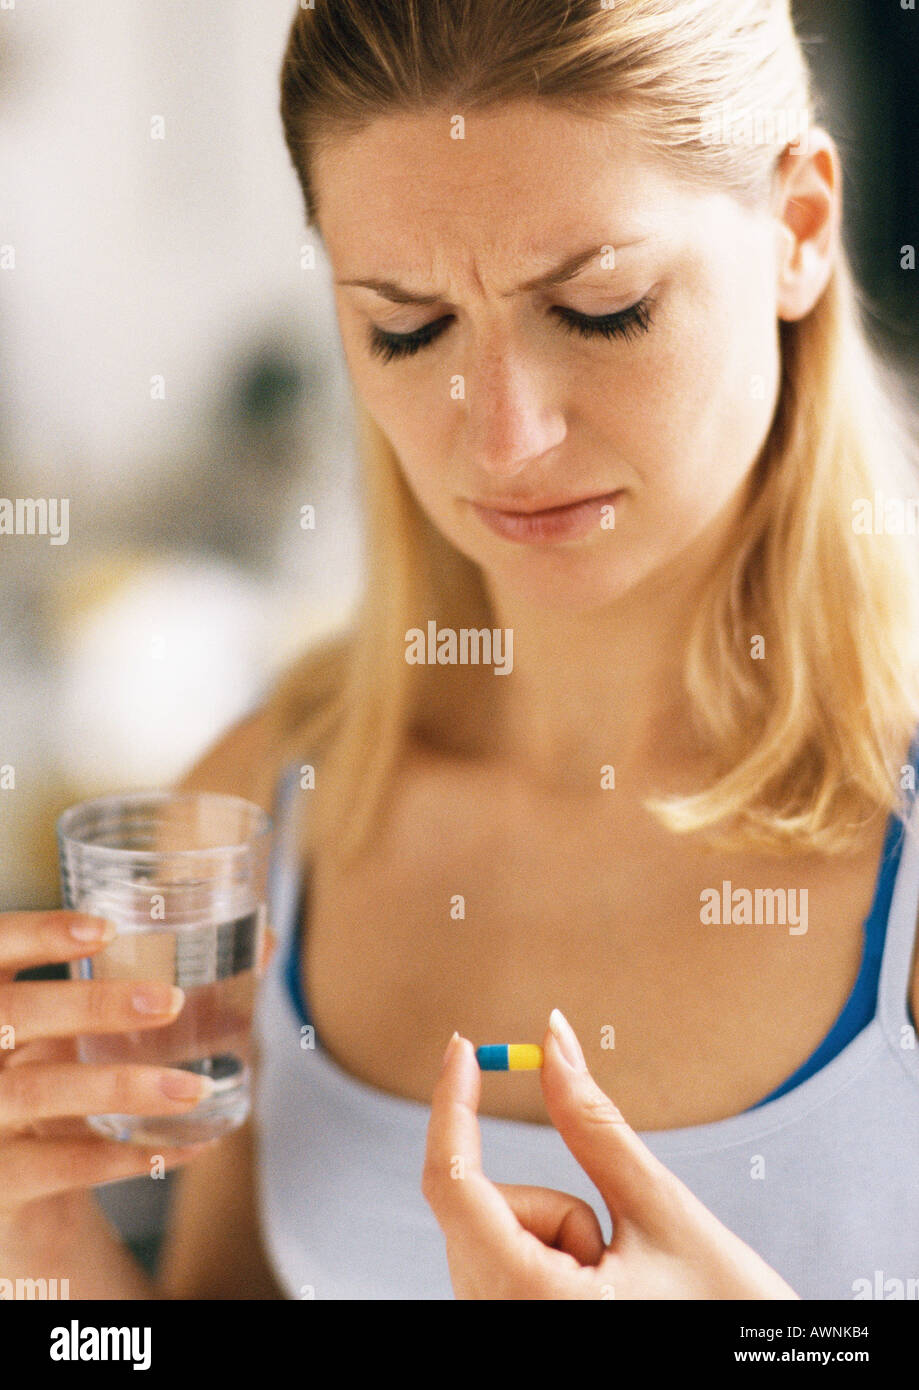 Woman holding pill and glass, looking down, head and shoulders, close-up Stock Photo